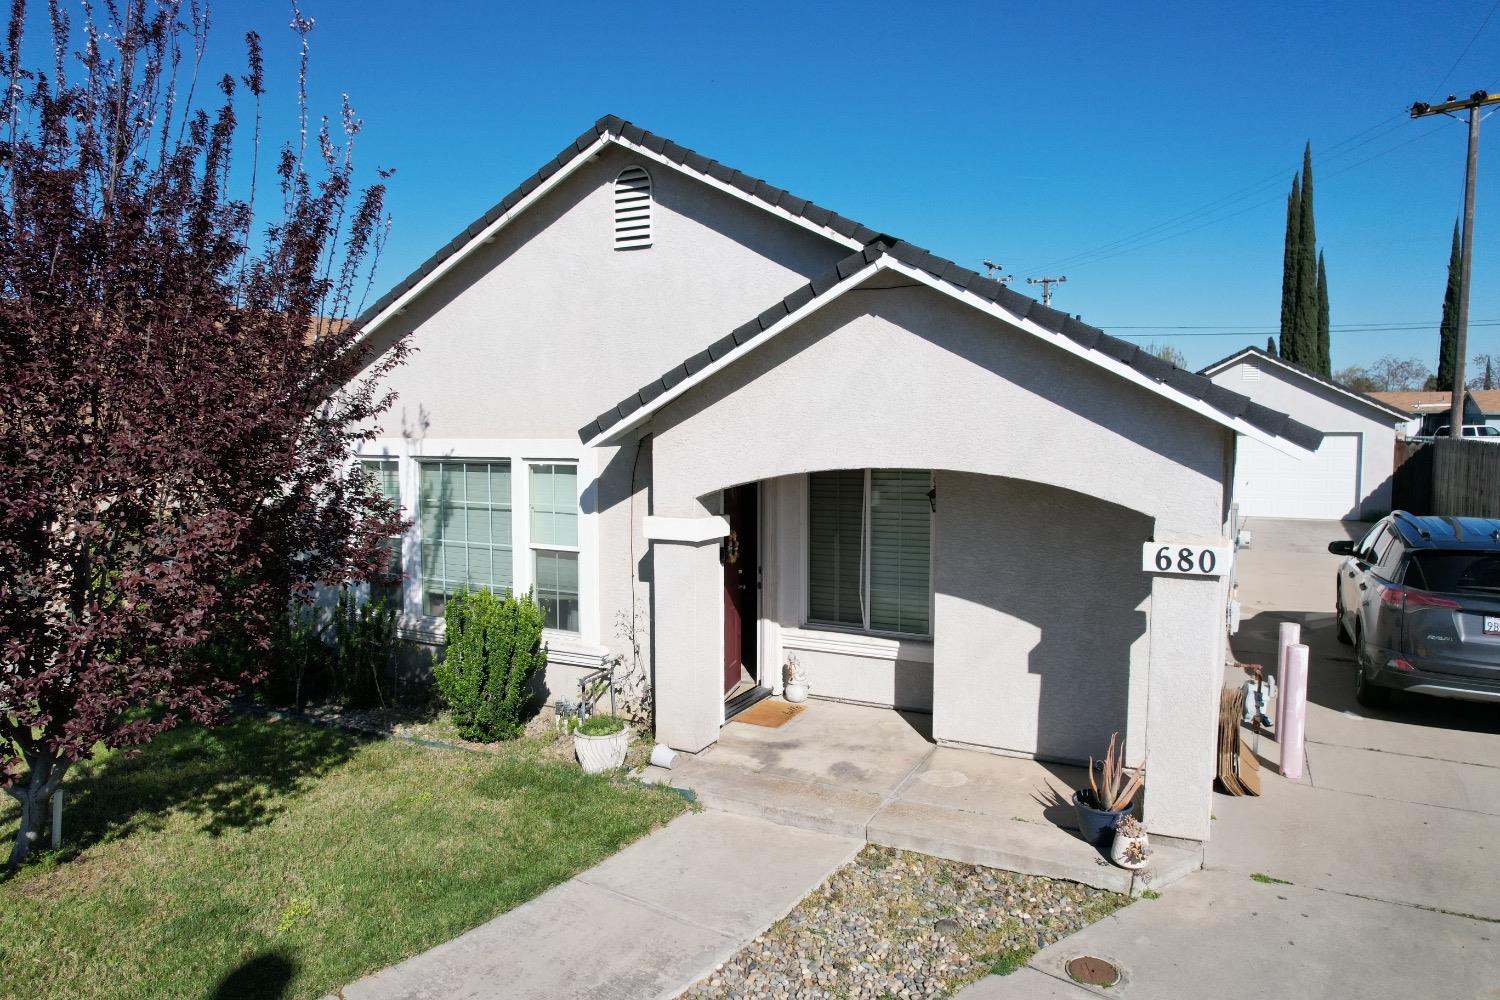 Photo of 680 San Joquin Ct in Atwater, CA